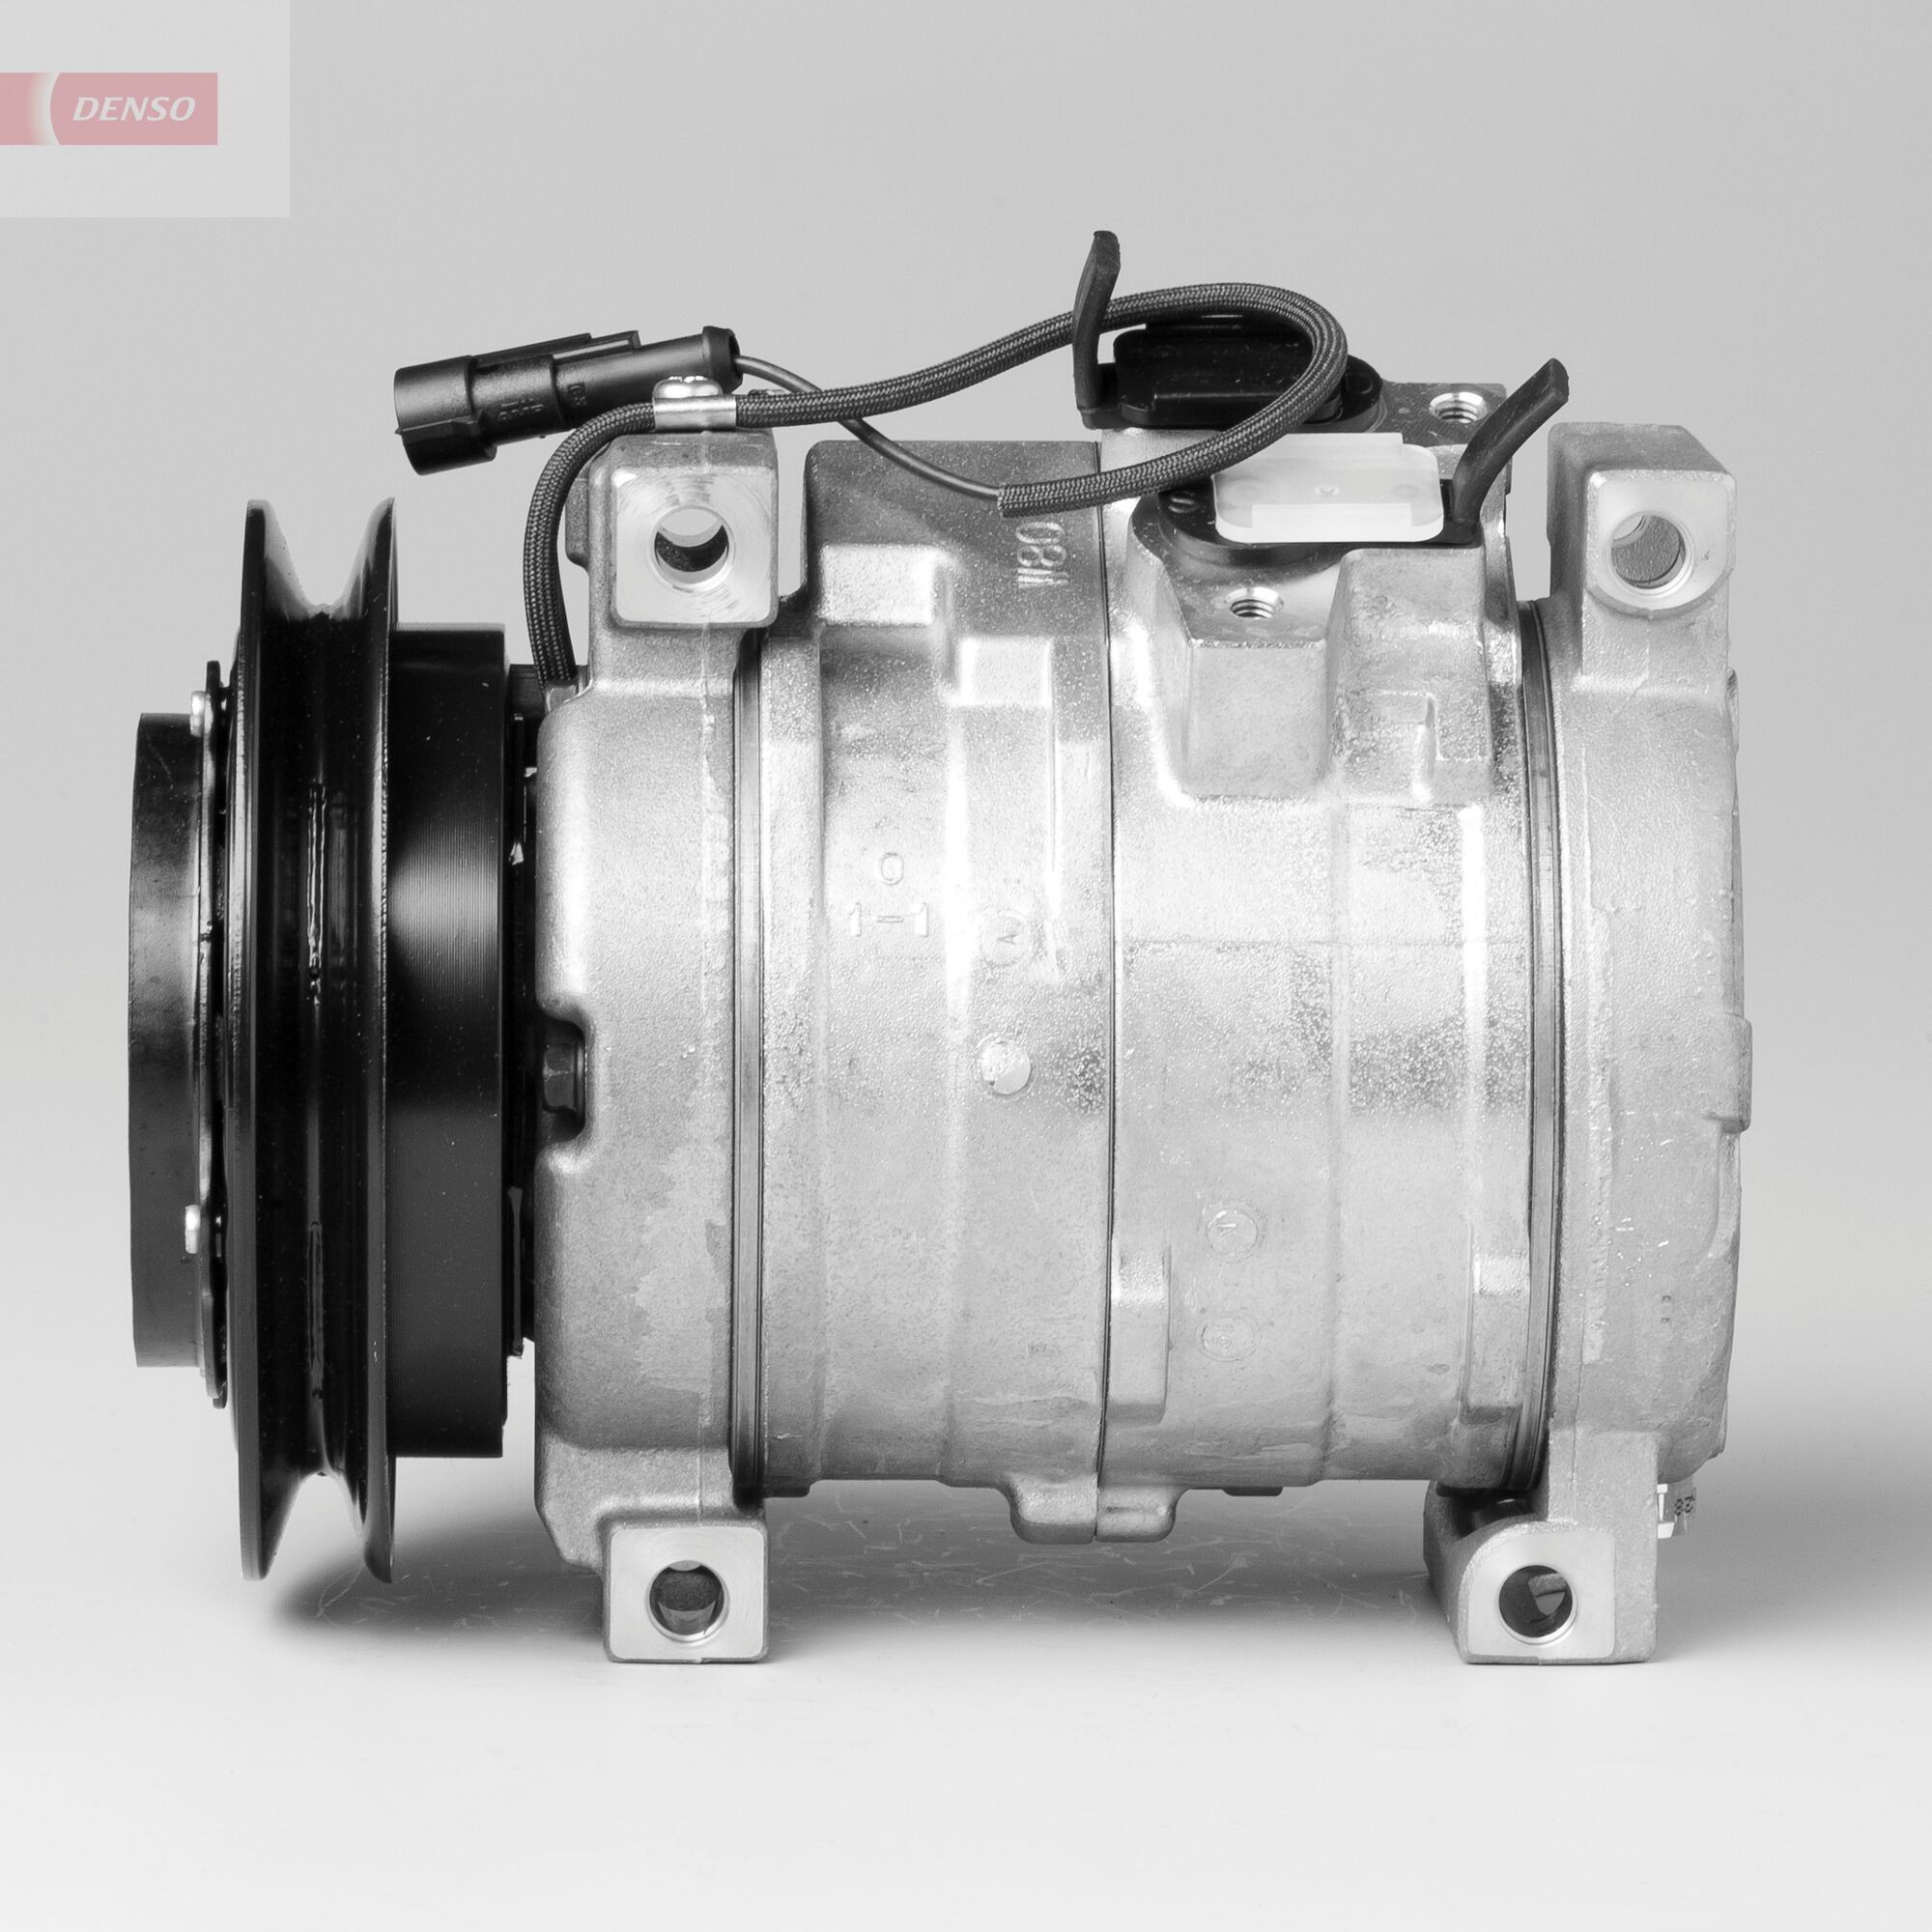 DENSO DCP99518 Air conditioning compressor 10S15C, 12V, PAG 46, R 134a, with magnetic clutch